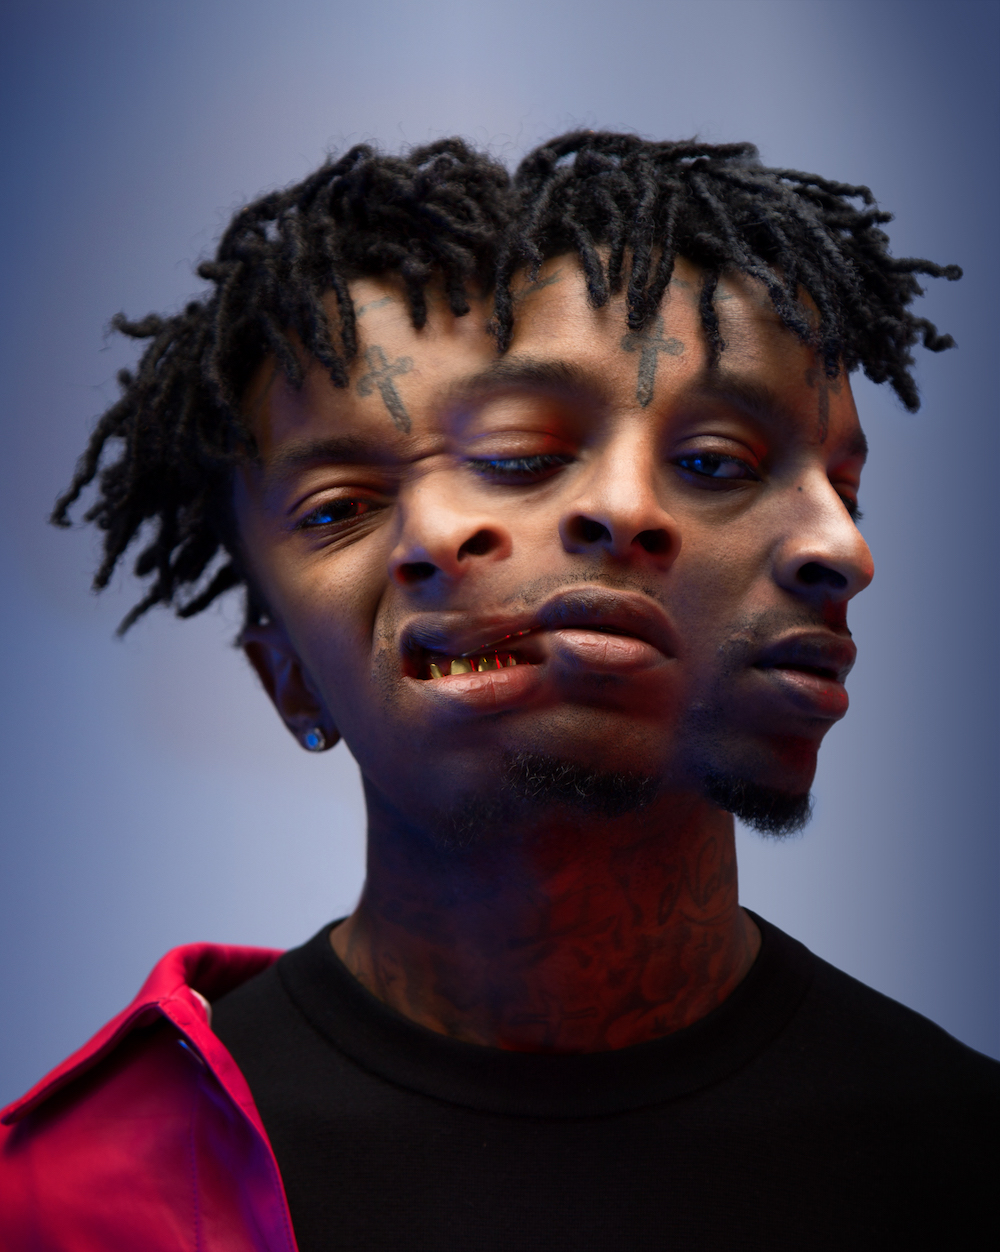 21 Savage Shows Off New Hairstyle